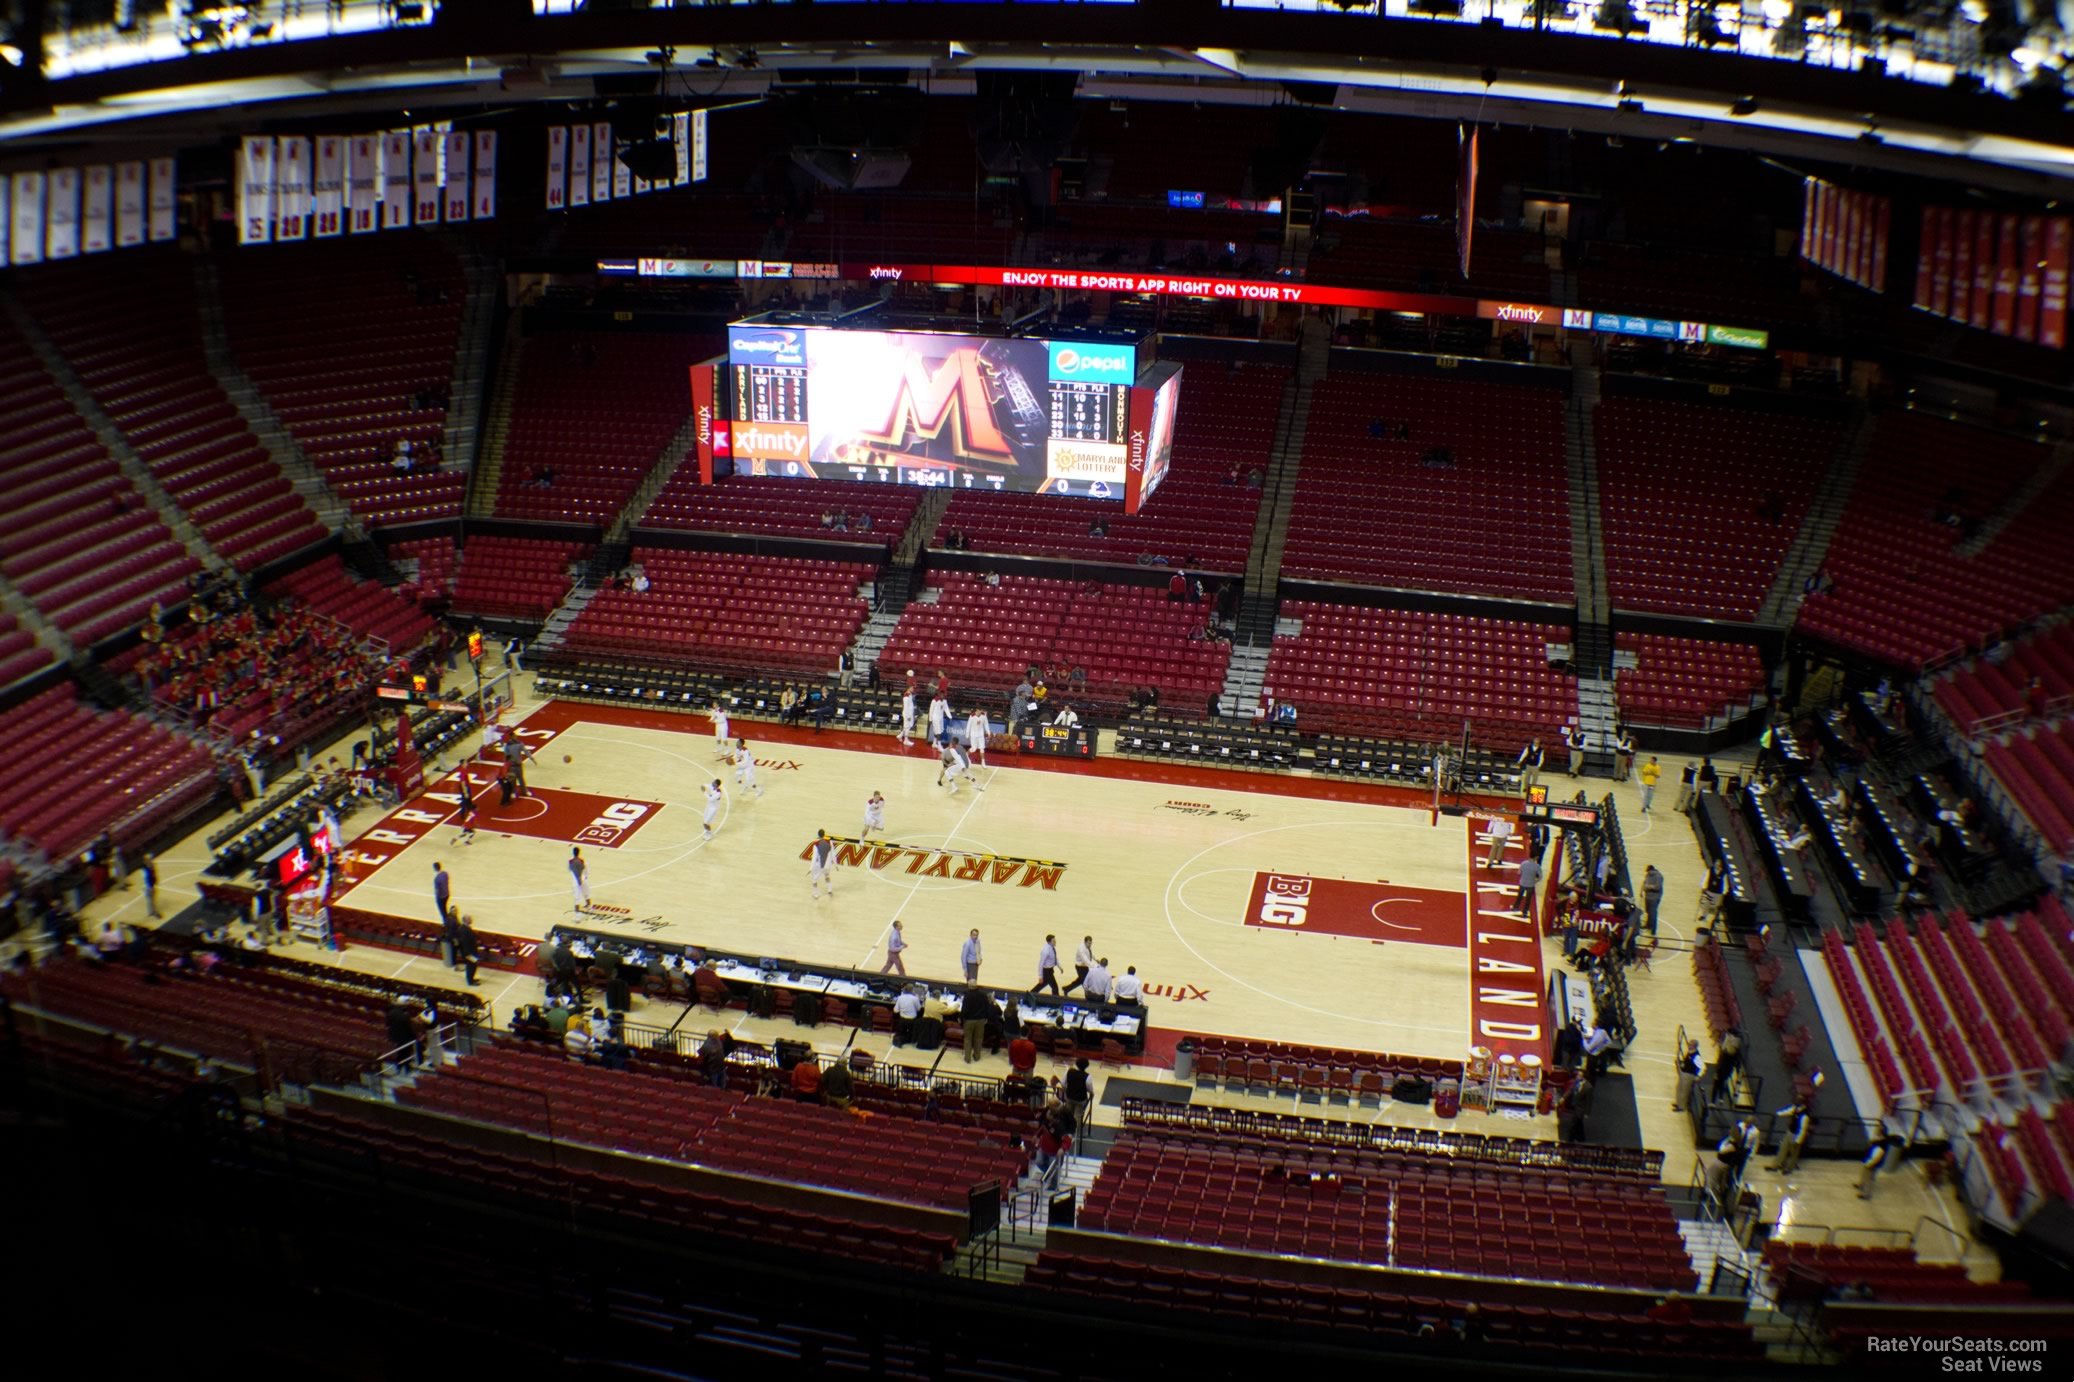 section 202, row 11 seat view  - xfinity center (maryland)